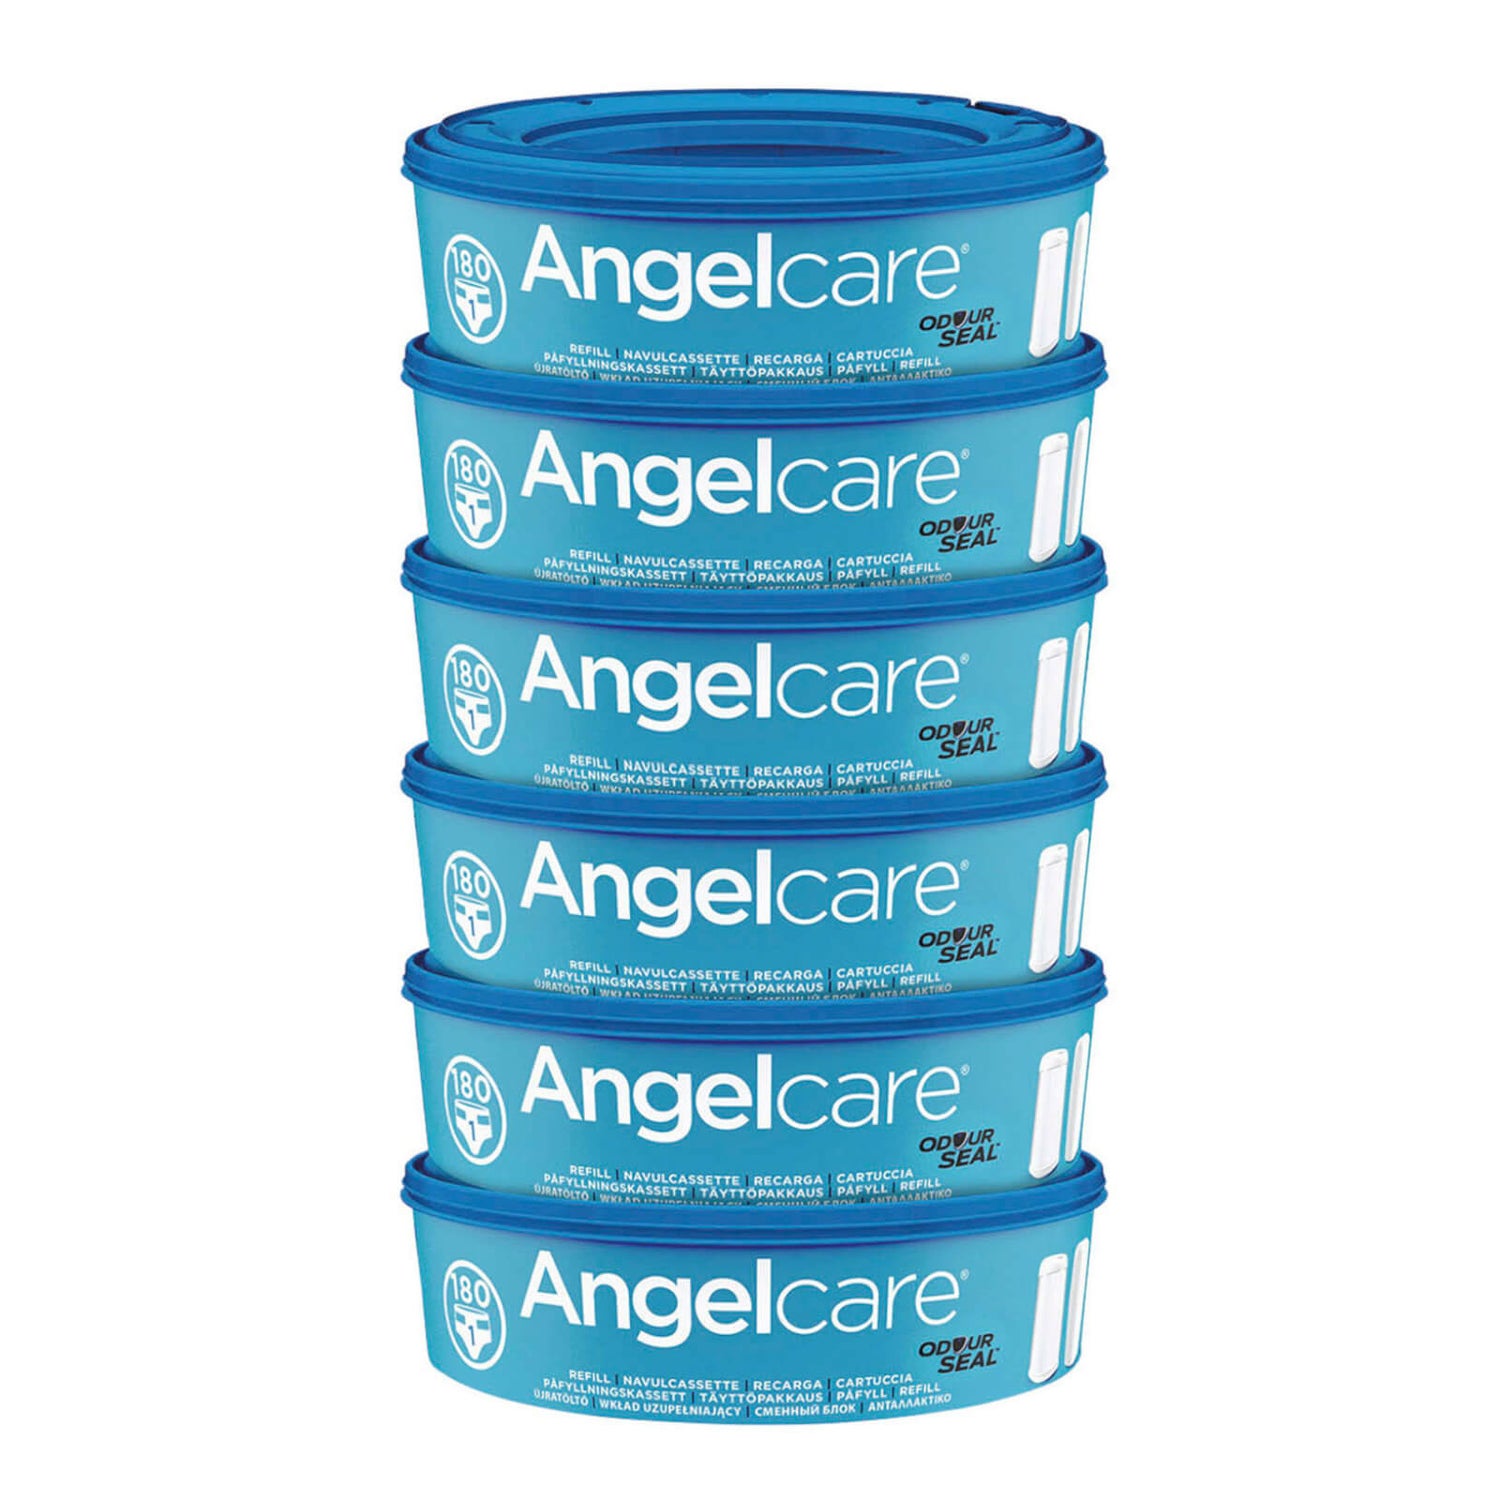 Angelcare Refill Cassettes (6 Pack)